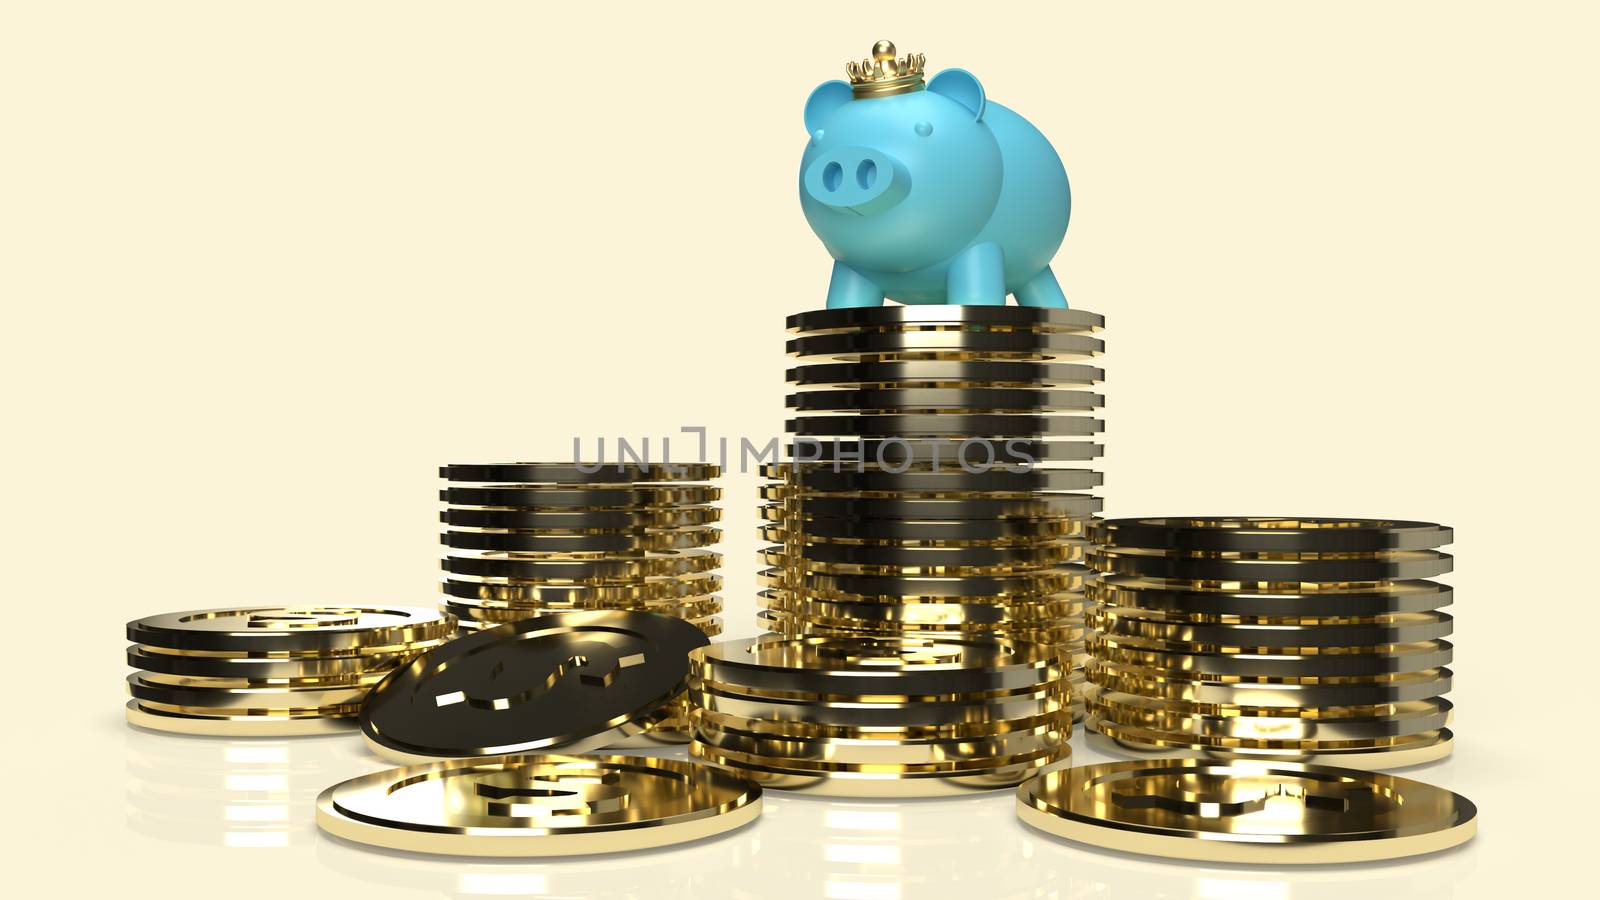 The blue pig bank and crown on gold coins for business content 3 by Niphon_13